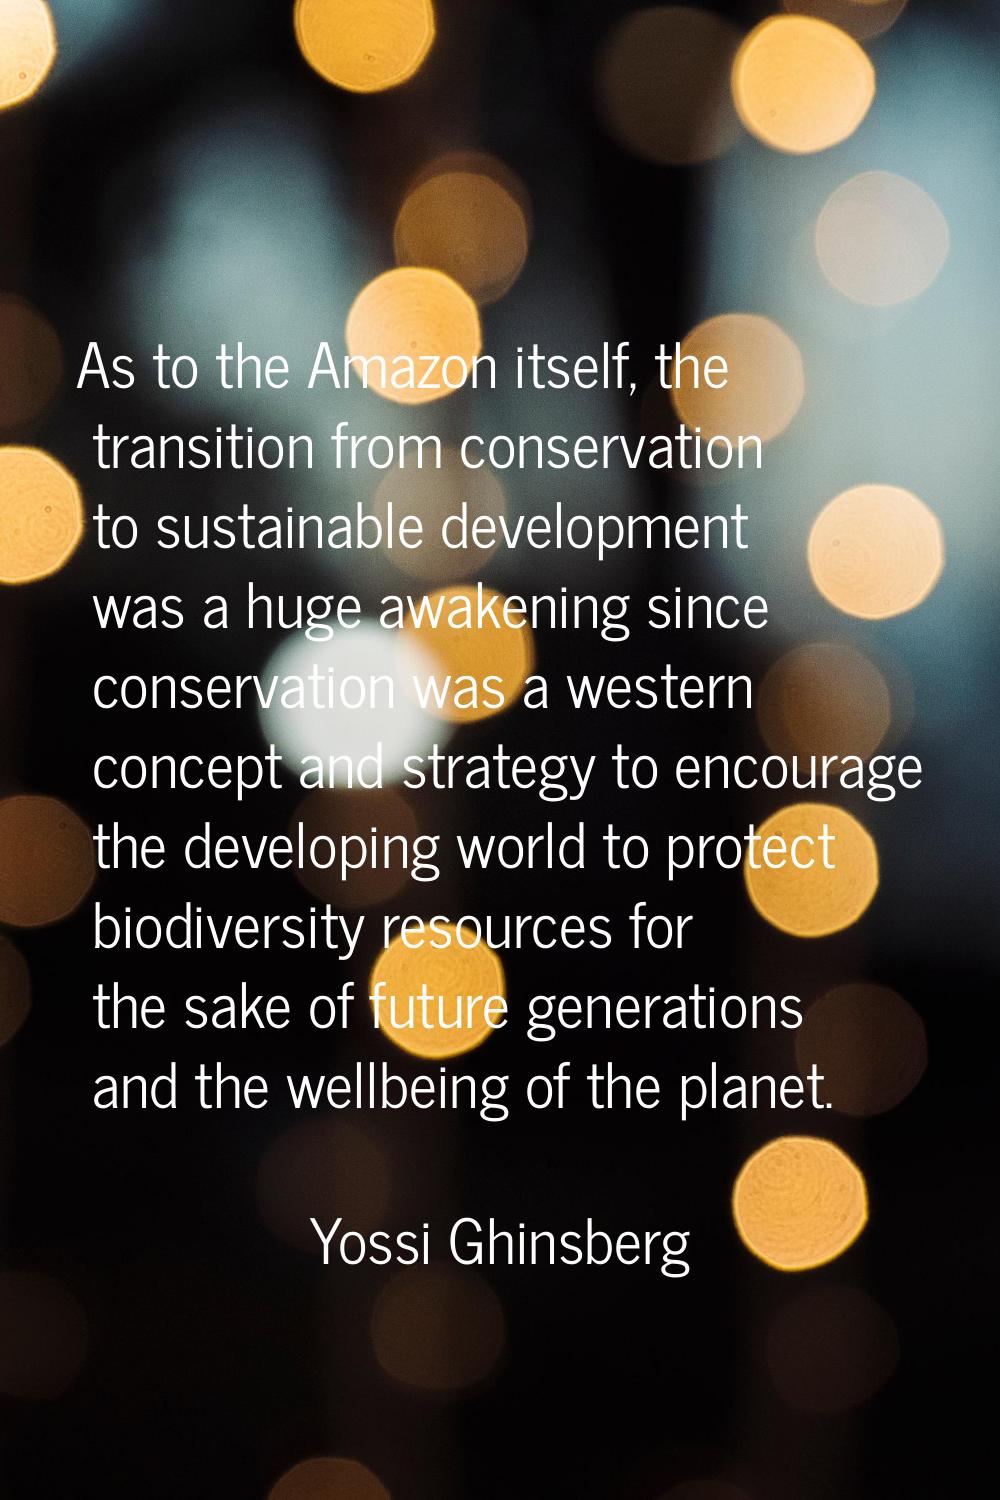 As to the Amazon itself, the transition from conservation to sustainable development was a huge awa